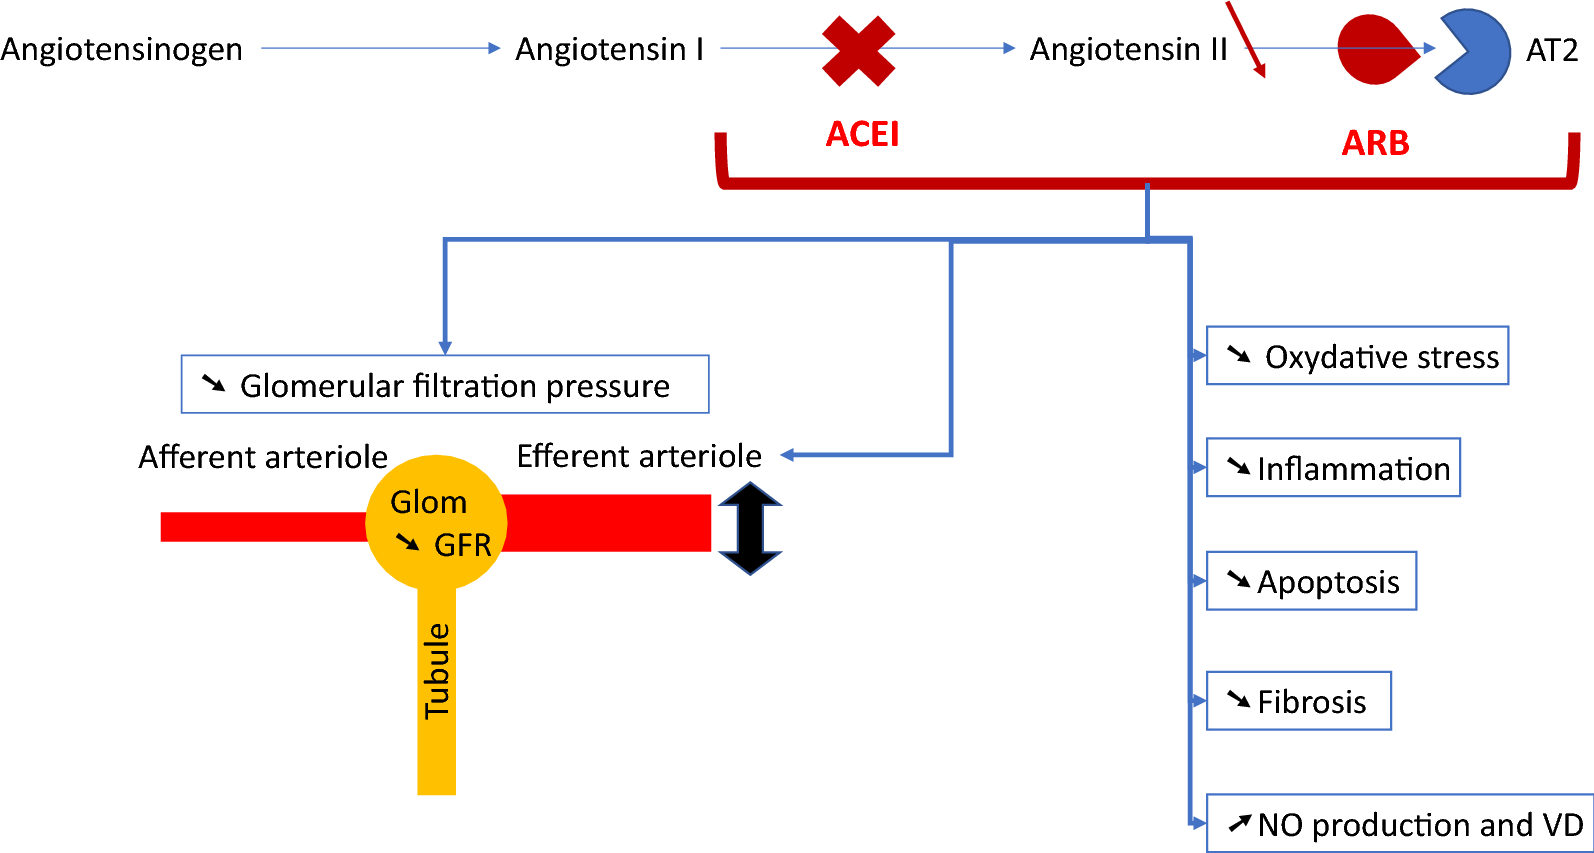 why are ace inhibitors good for heart failure